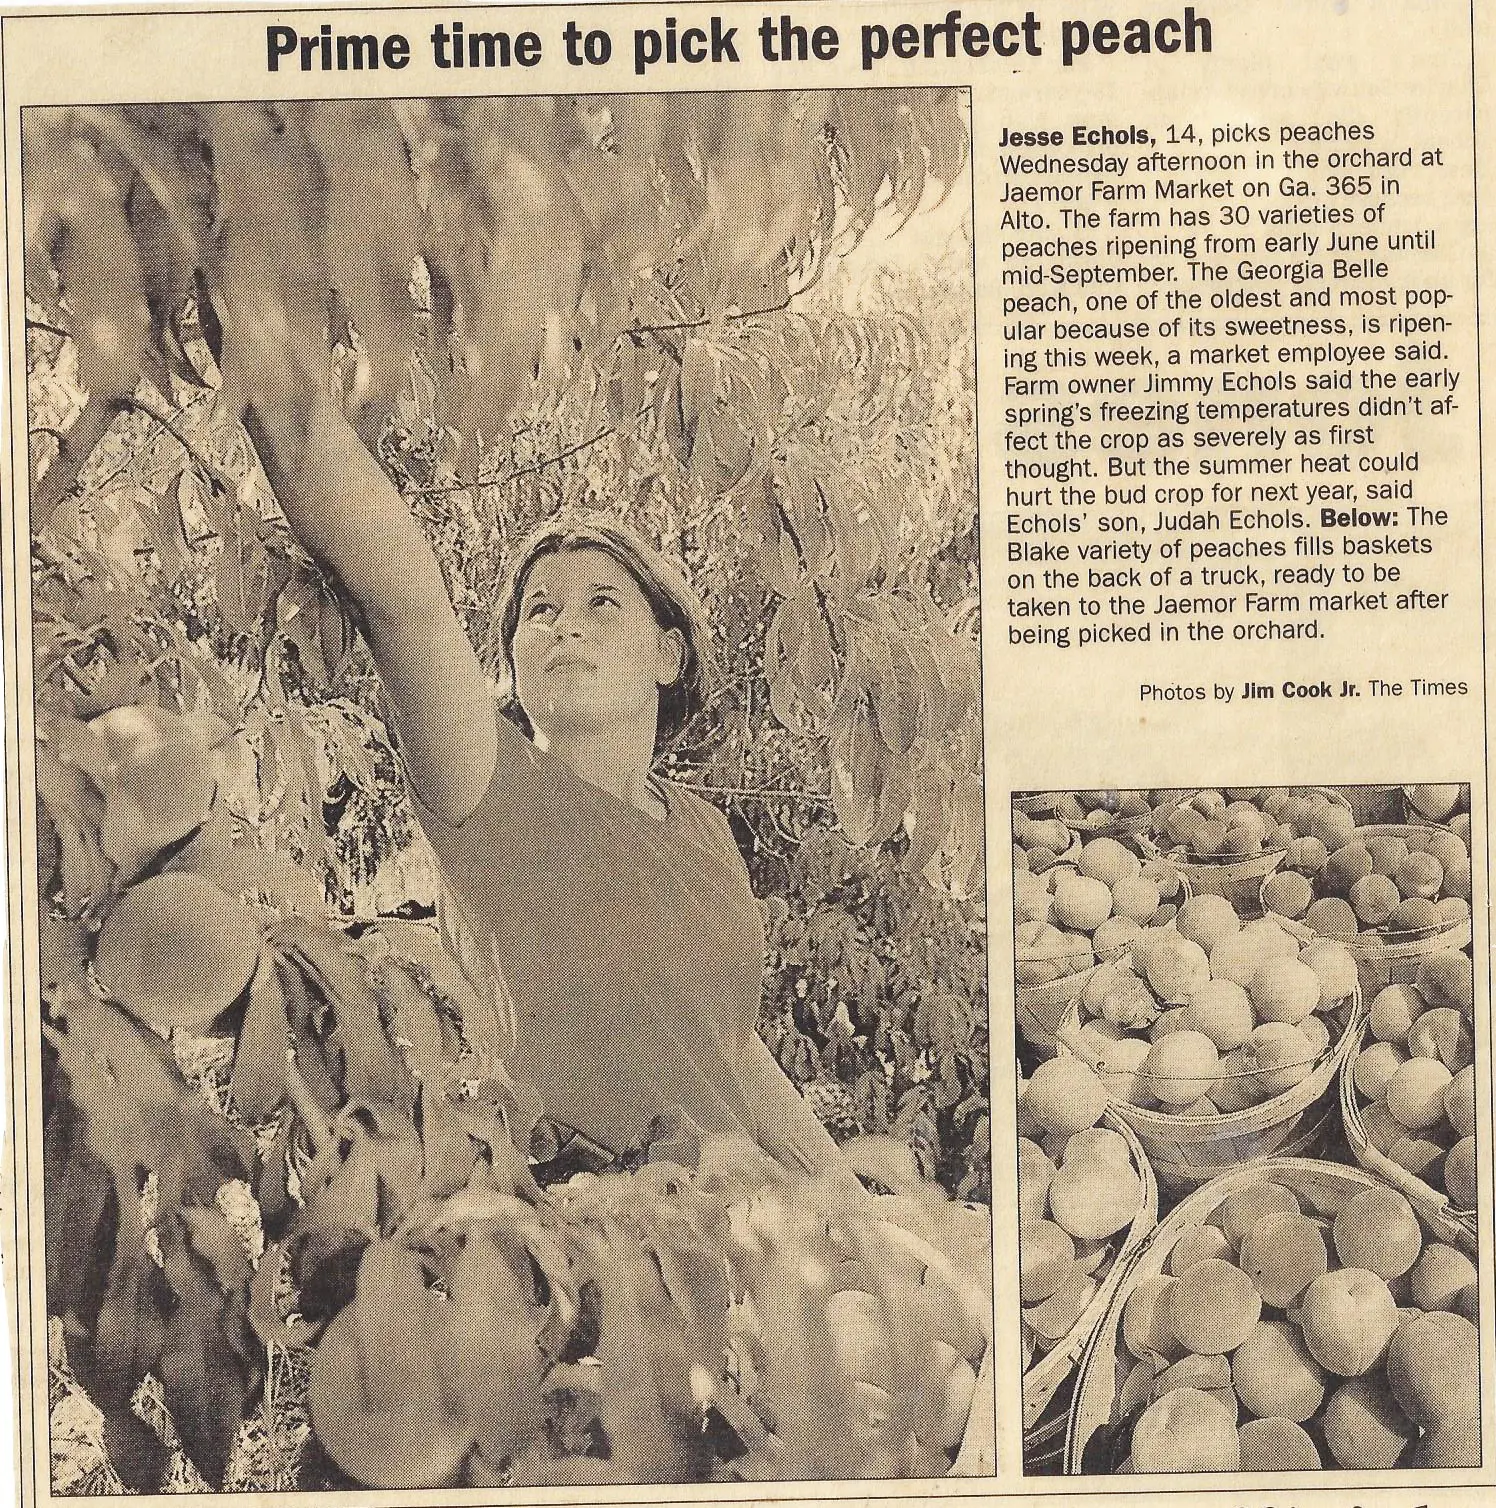 Jesse Echols picking peaches in newspaper clipping